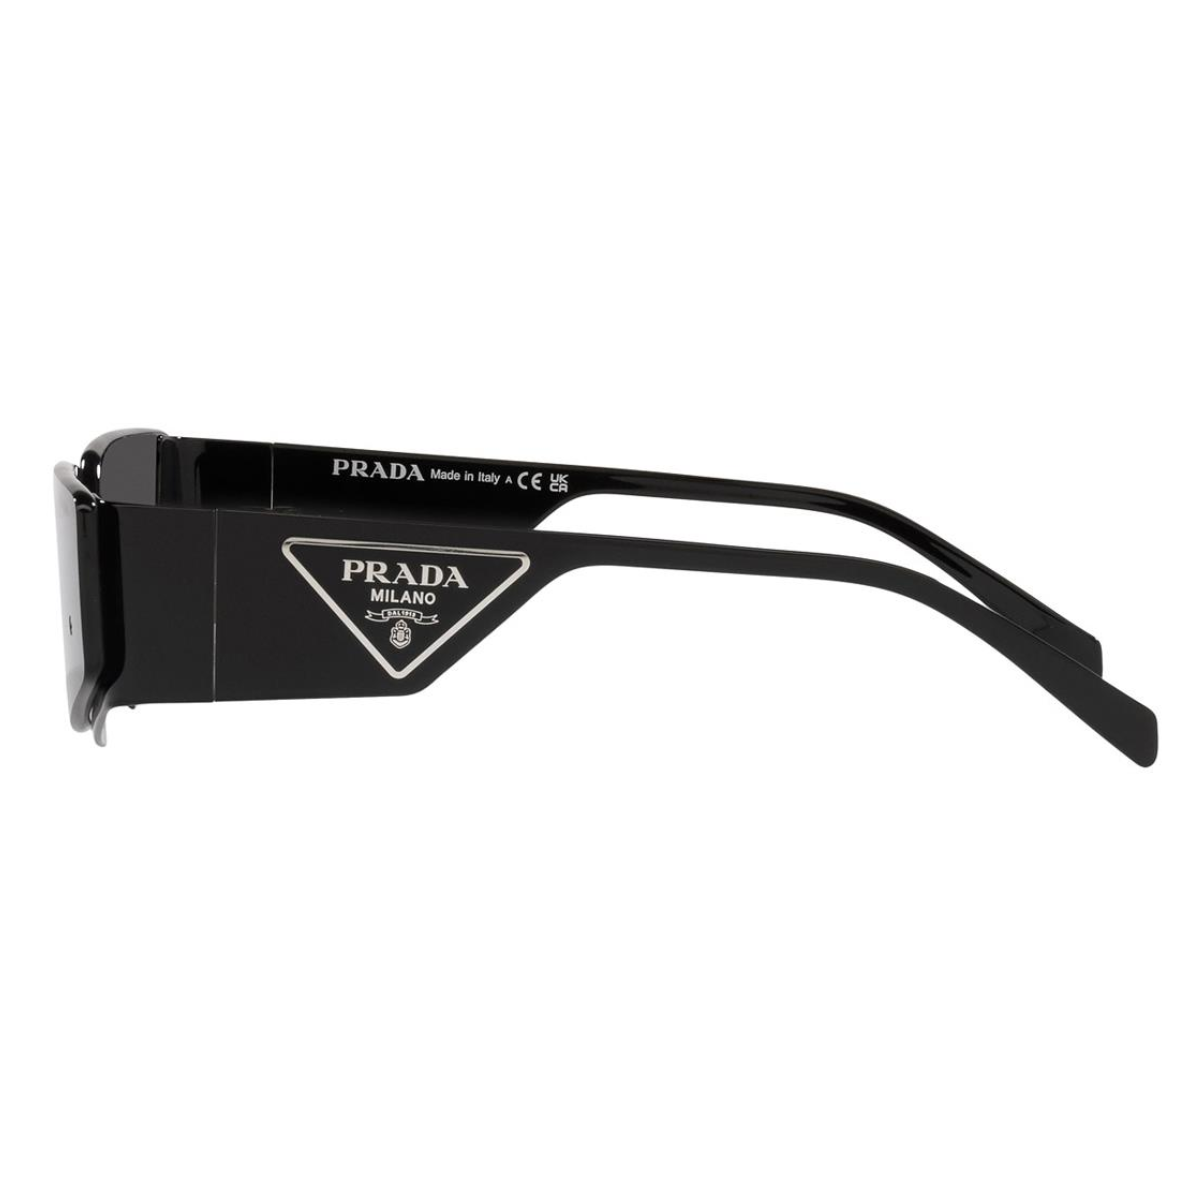 "Shop now for Prada SPR 58Z 1AB-06L sunglasses at Optorium. Embrace elegance with these black metal rectangle shades, ideal for both men and women seeking stylish eyewear."